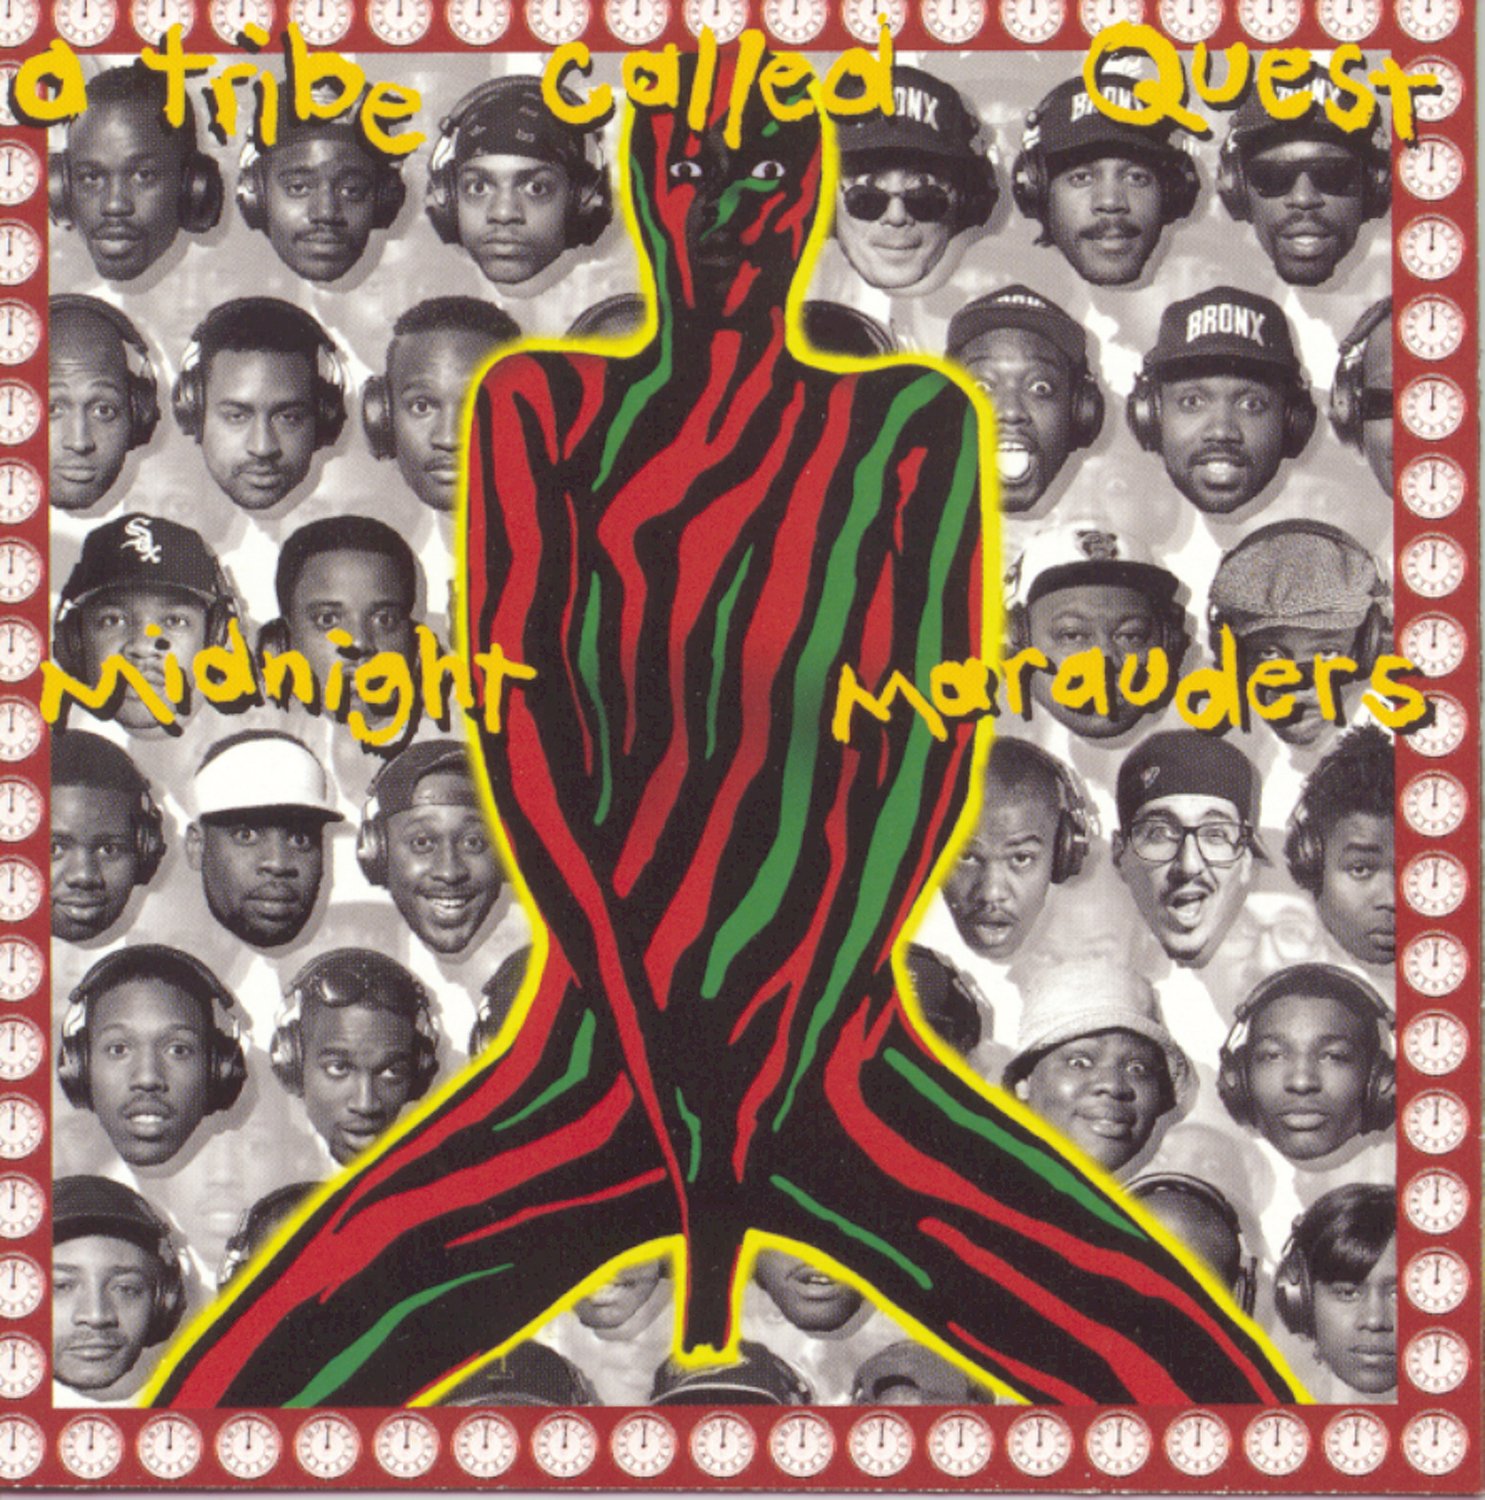 The cover for A Tribe Called Quest's third album, "Midnight Marauders" featuring the same woman from the previous album along with faces of notable hip hop figures. 